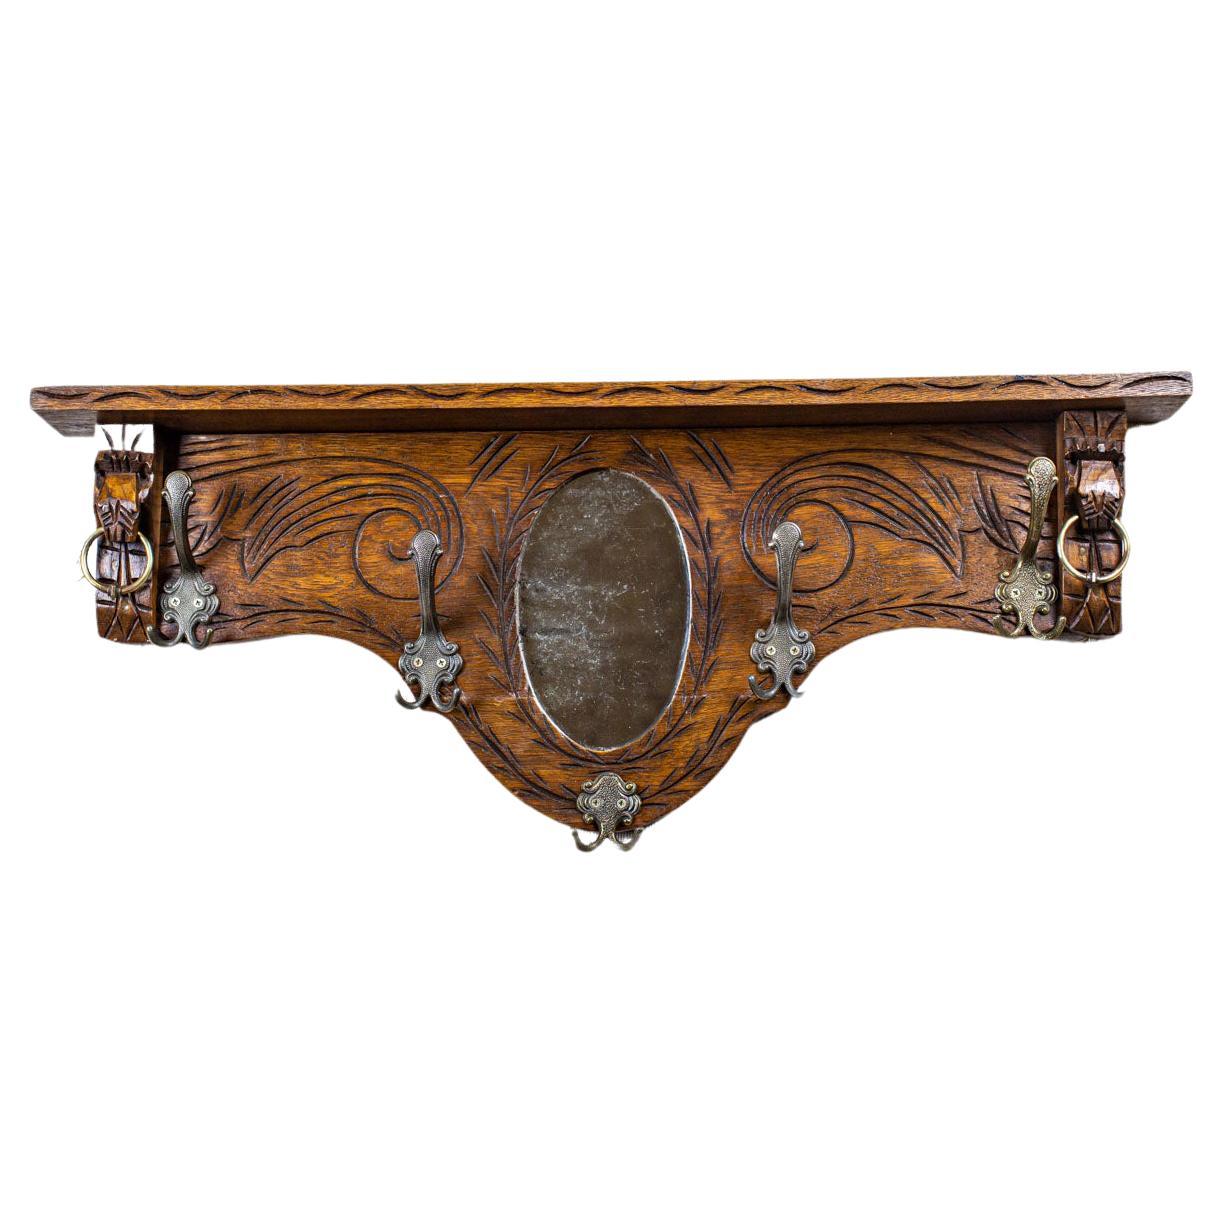 Oak Coat Rack from the Early 20th Century with Mirror